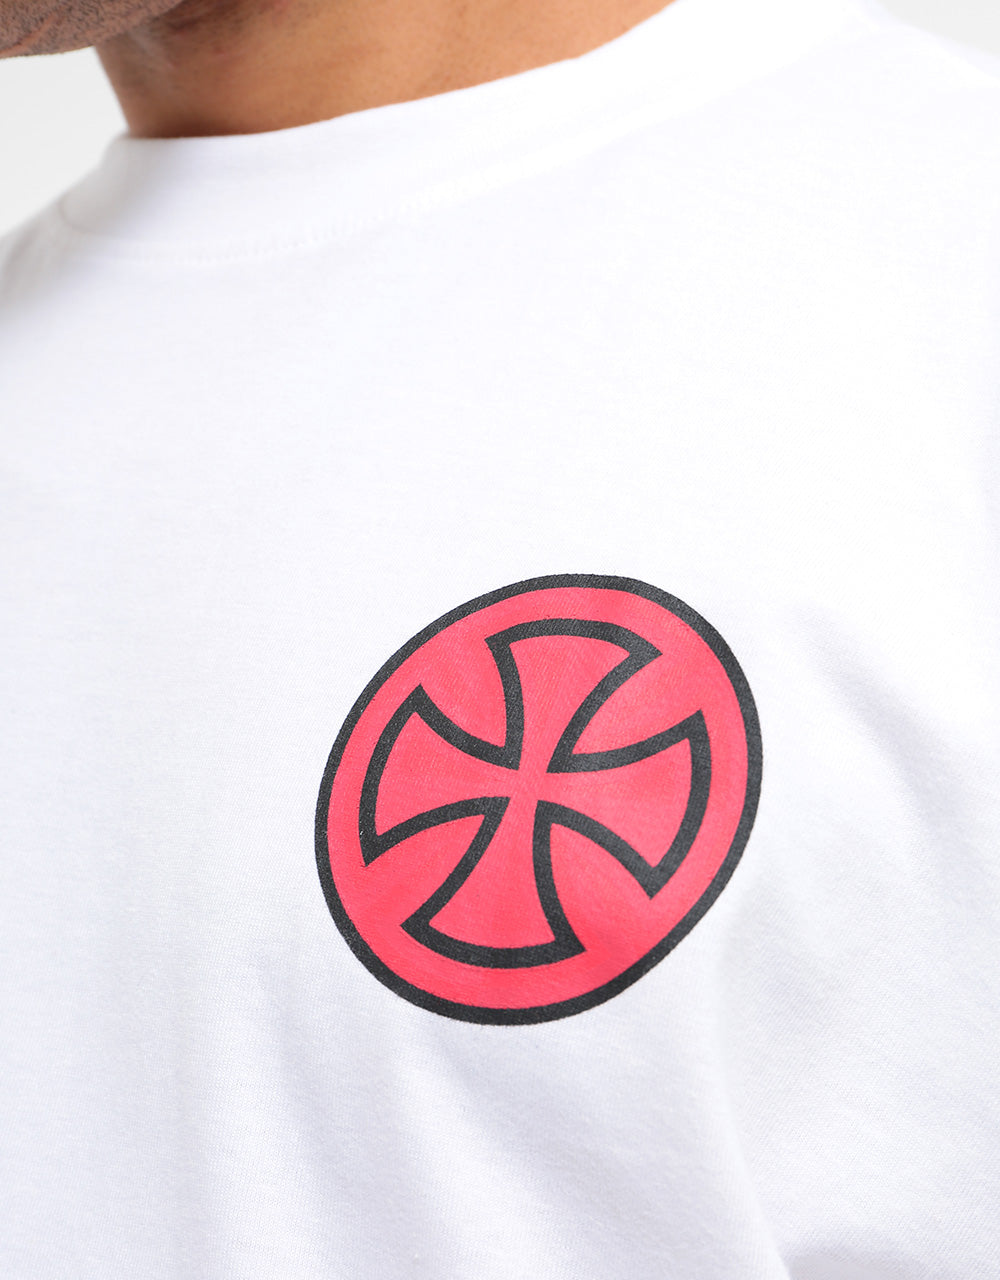 Independent Target T-Shirt - White